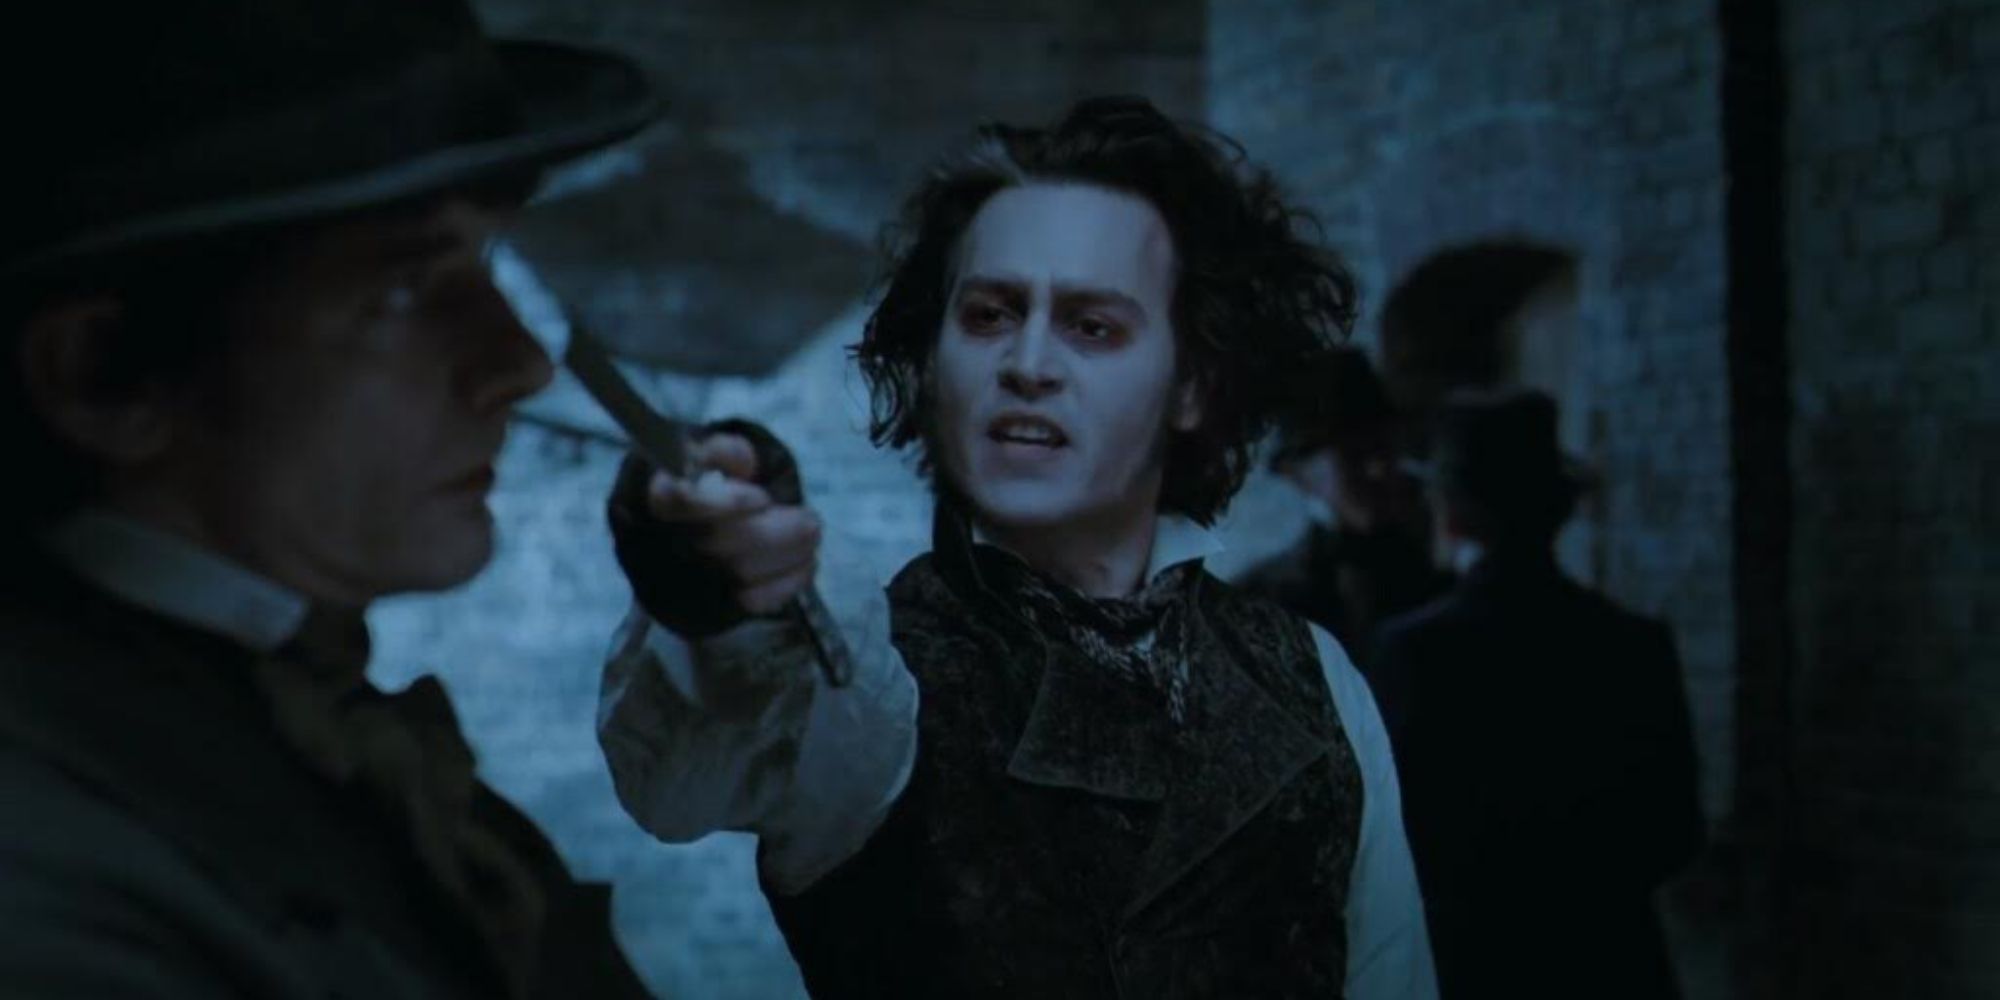 Johnny Depp as Sweeney Todd holding his razor to a man's face